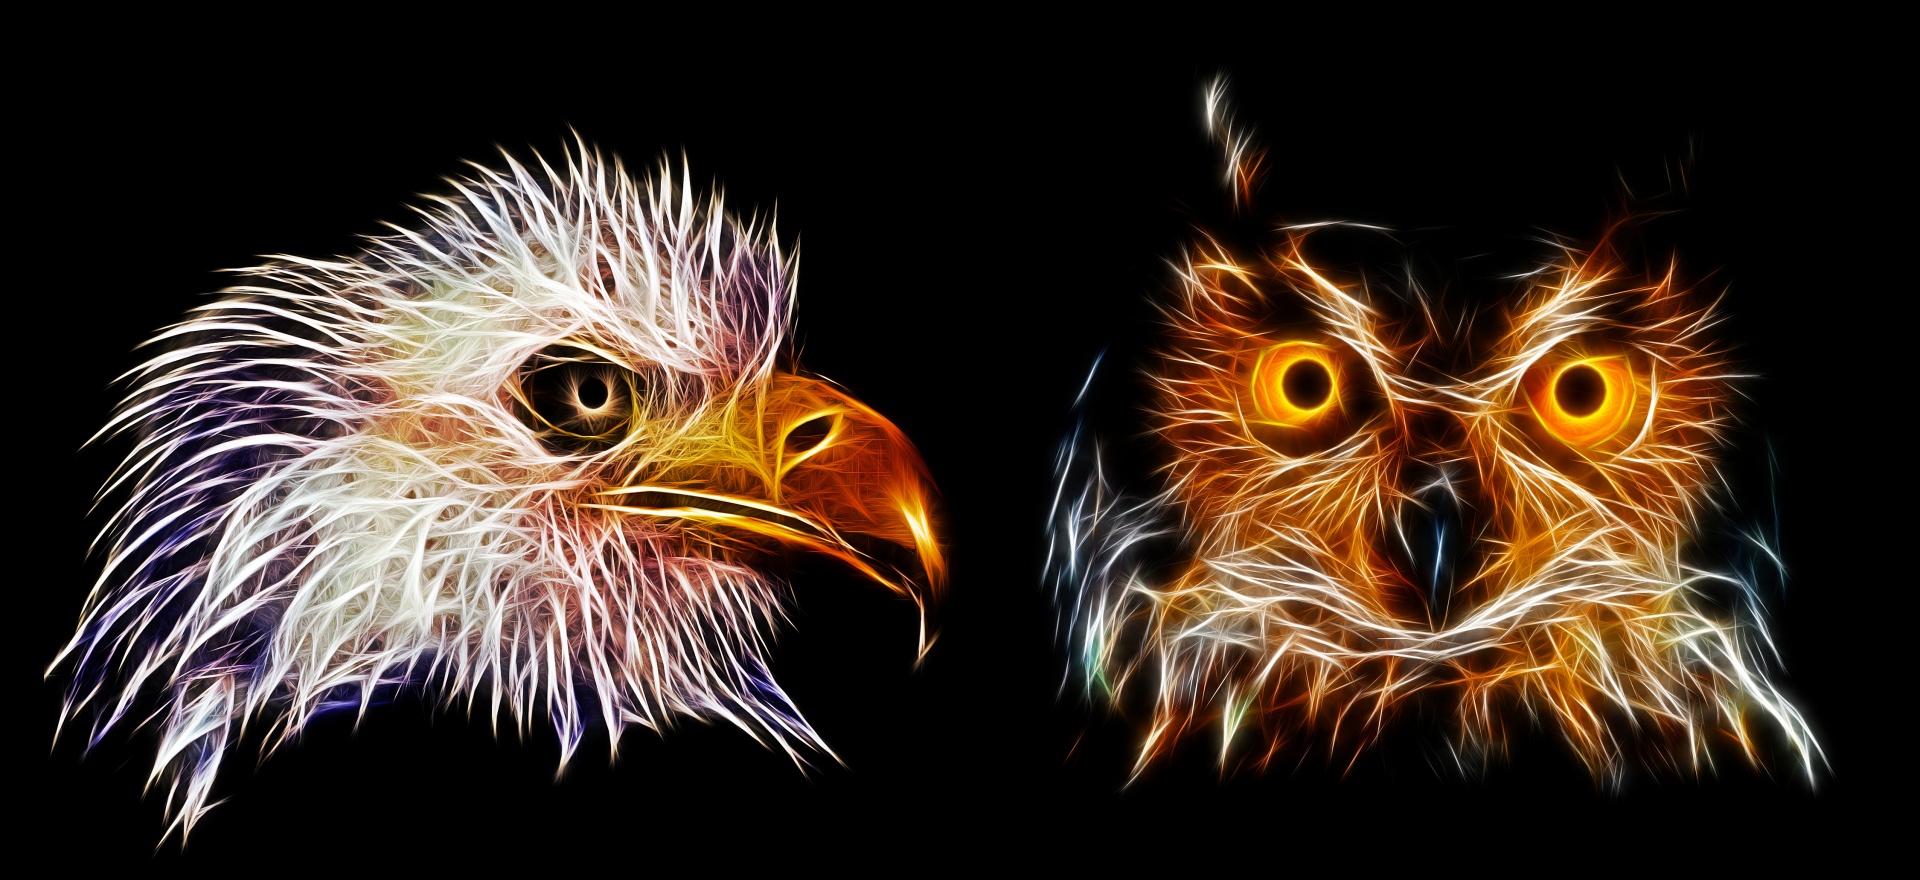 Predatory birds with some artistic effects